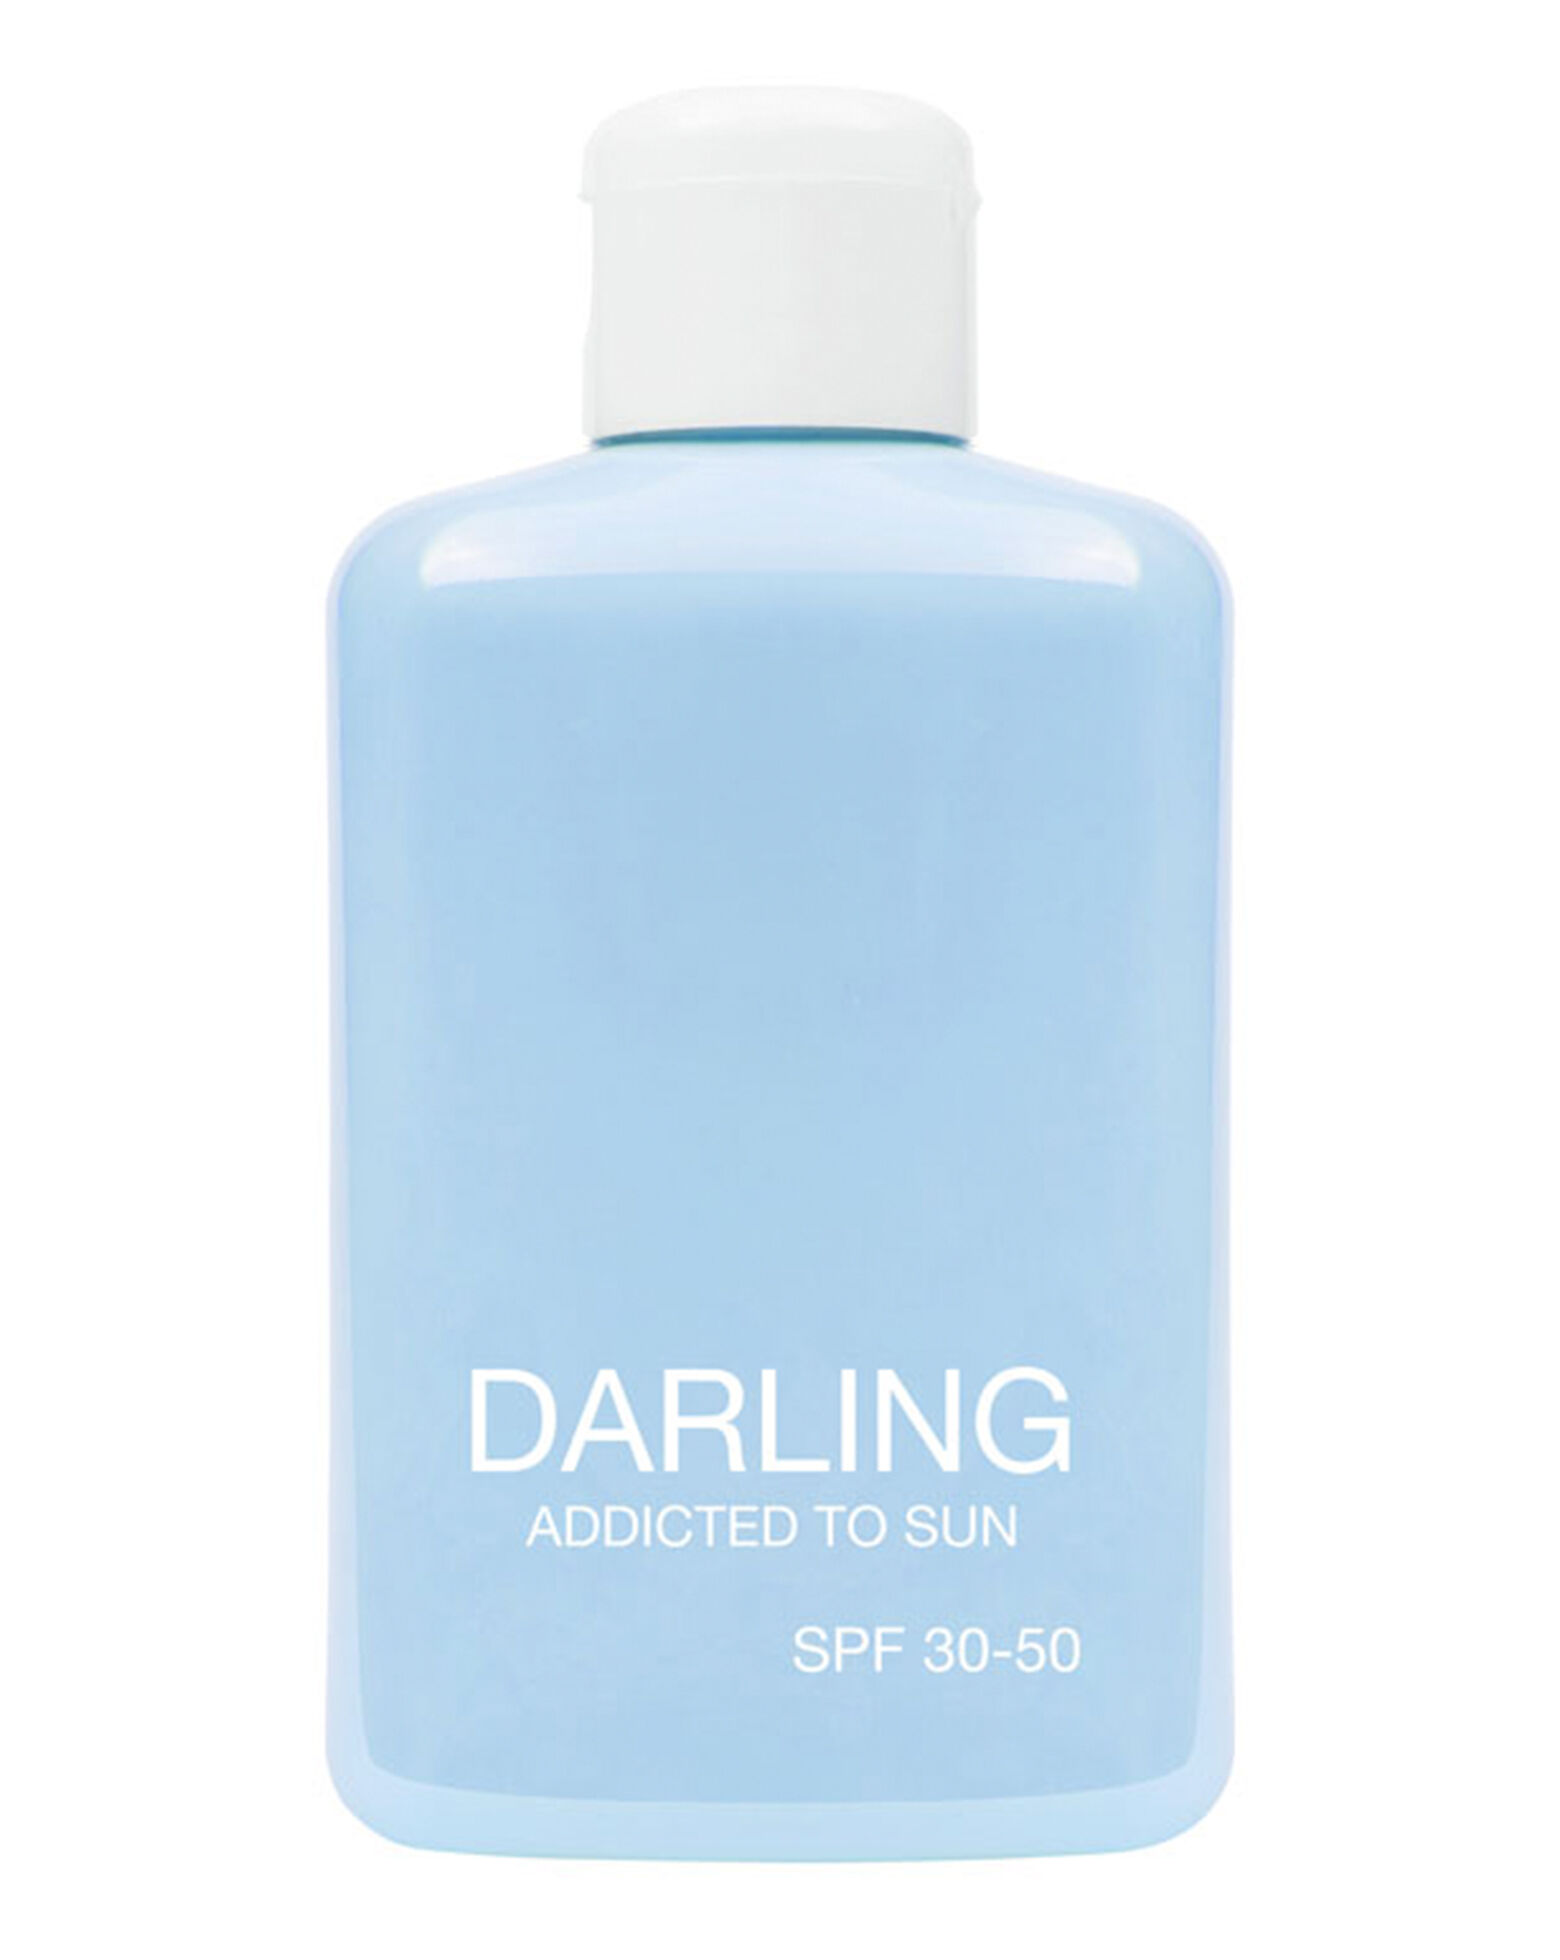 DARLING - High Protection SPF 30-50